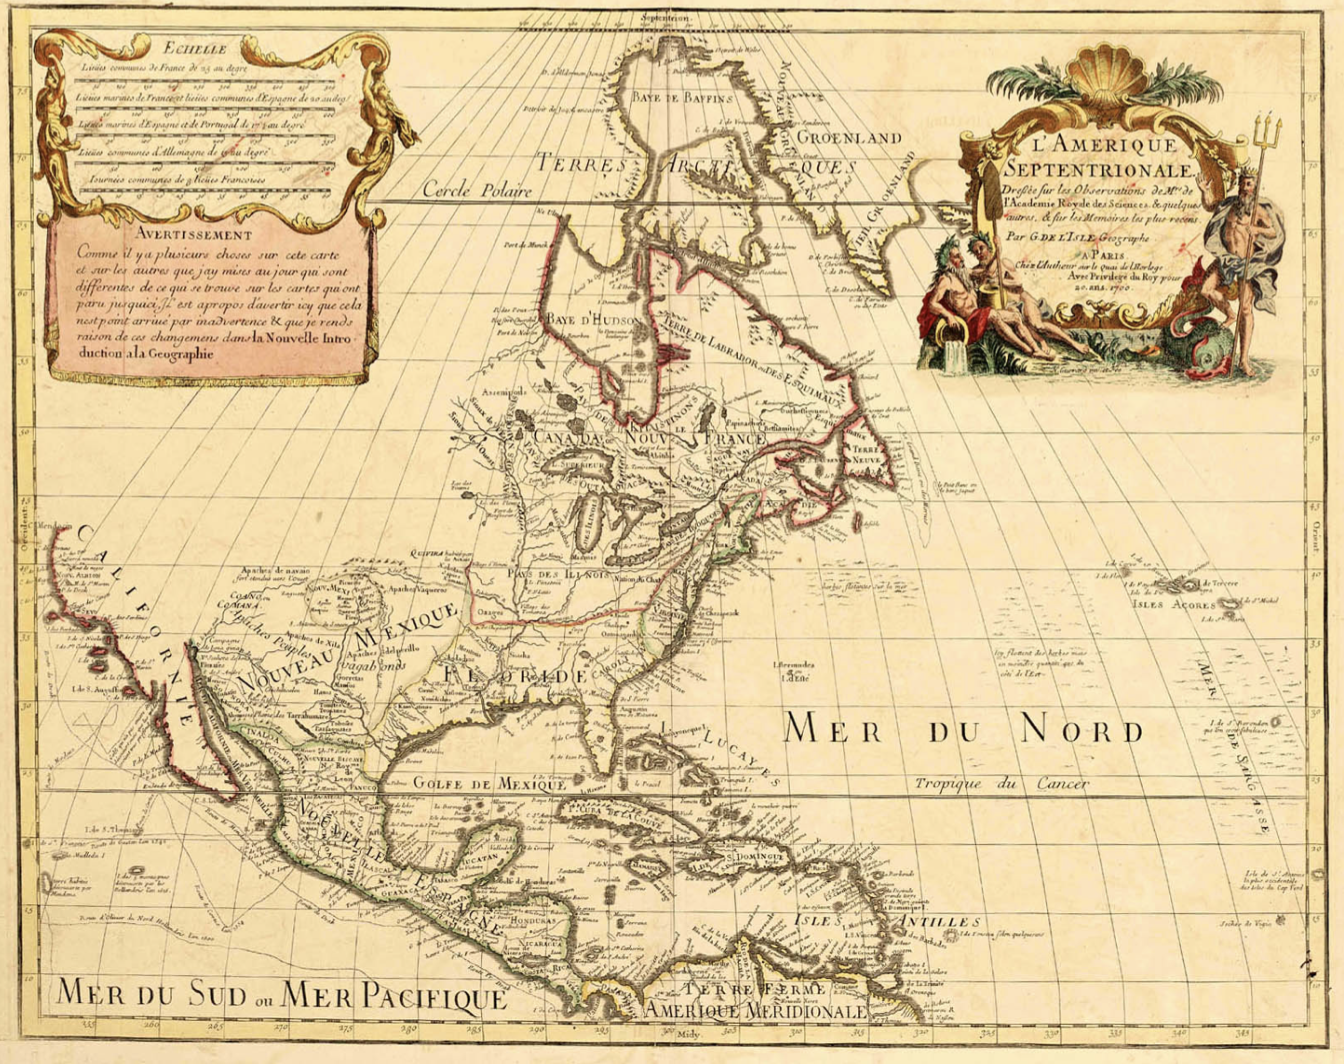 Map of North America by Guillaume de L’Isle presents a French view of the continent about 1700